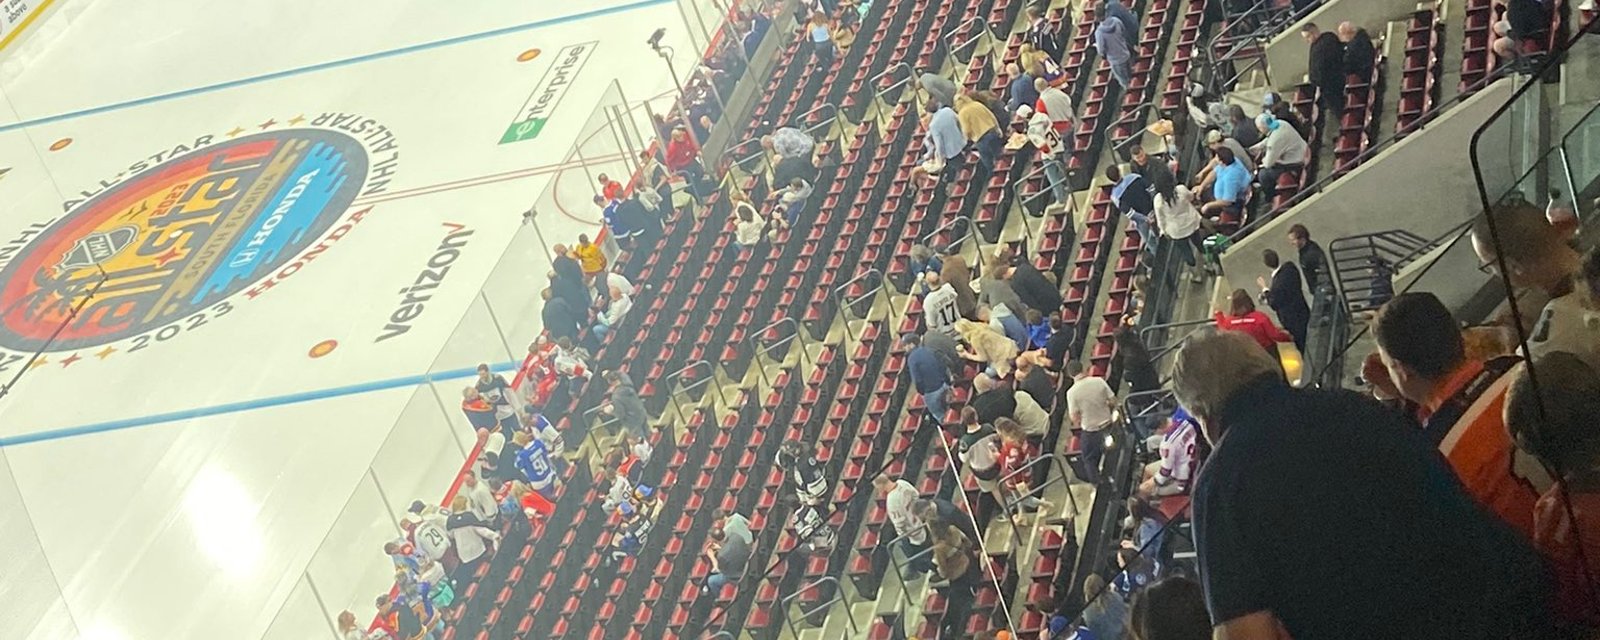 Embarrassing attendance at All-Star Skills competition